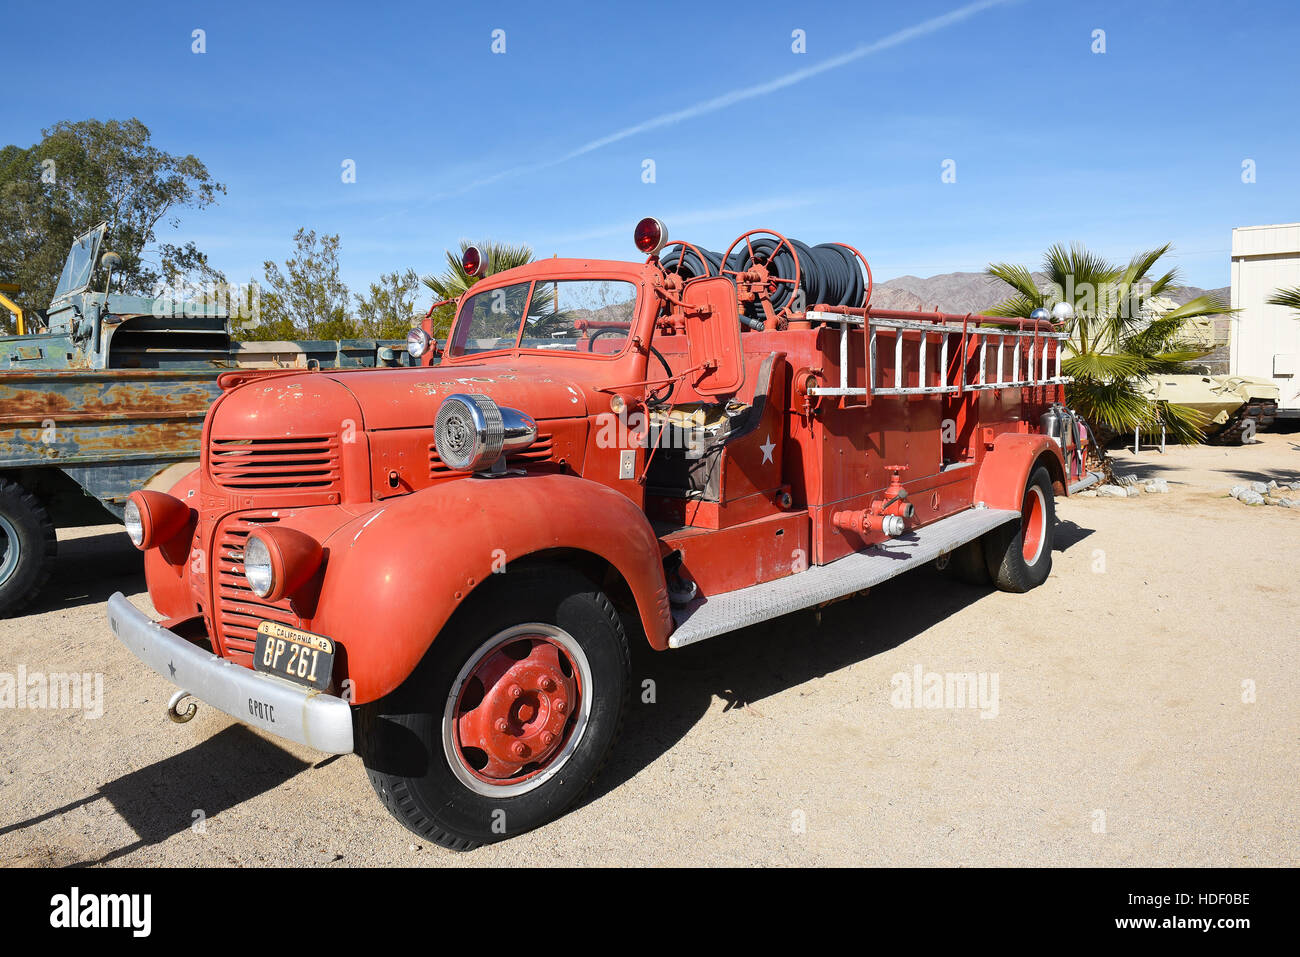 CHIRIACO SUMMIT, CA - DECEMBER 10, 2016: 1950 Dodge Fire Truck at the General Patton Memorial Museum. The vehicles were used by the US Army. Stock Photo